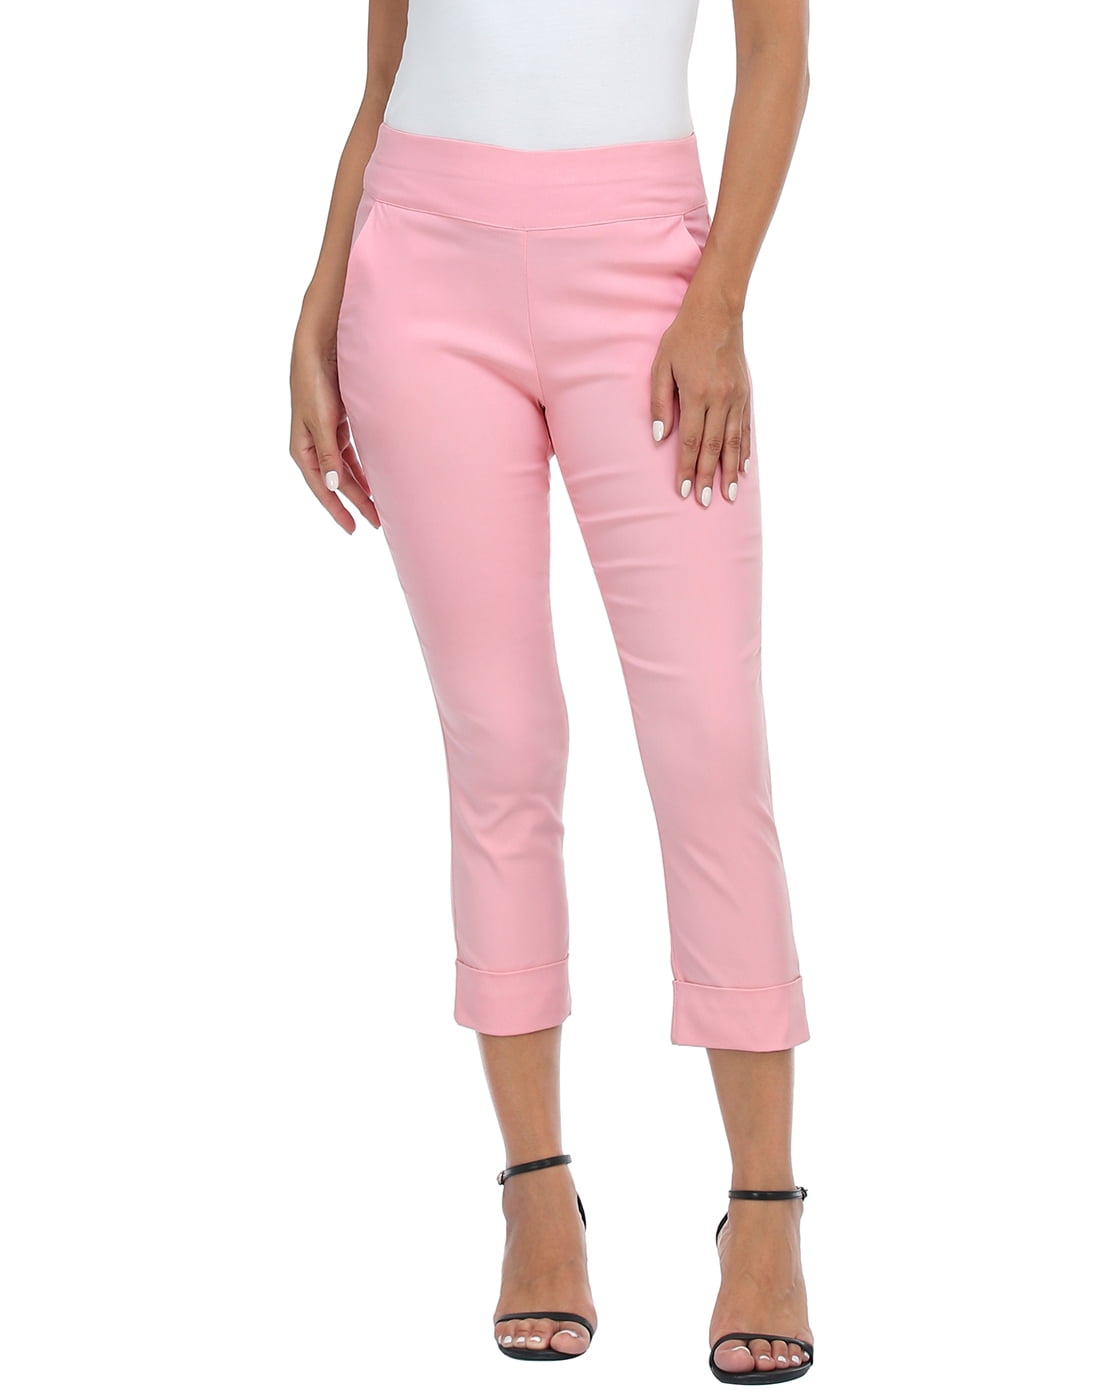 HDE Pull On Capri Pants For Women with Pockets Elastic Waist Cropped Pants  Pink M 